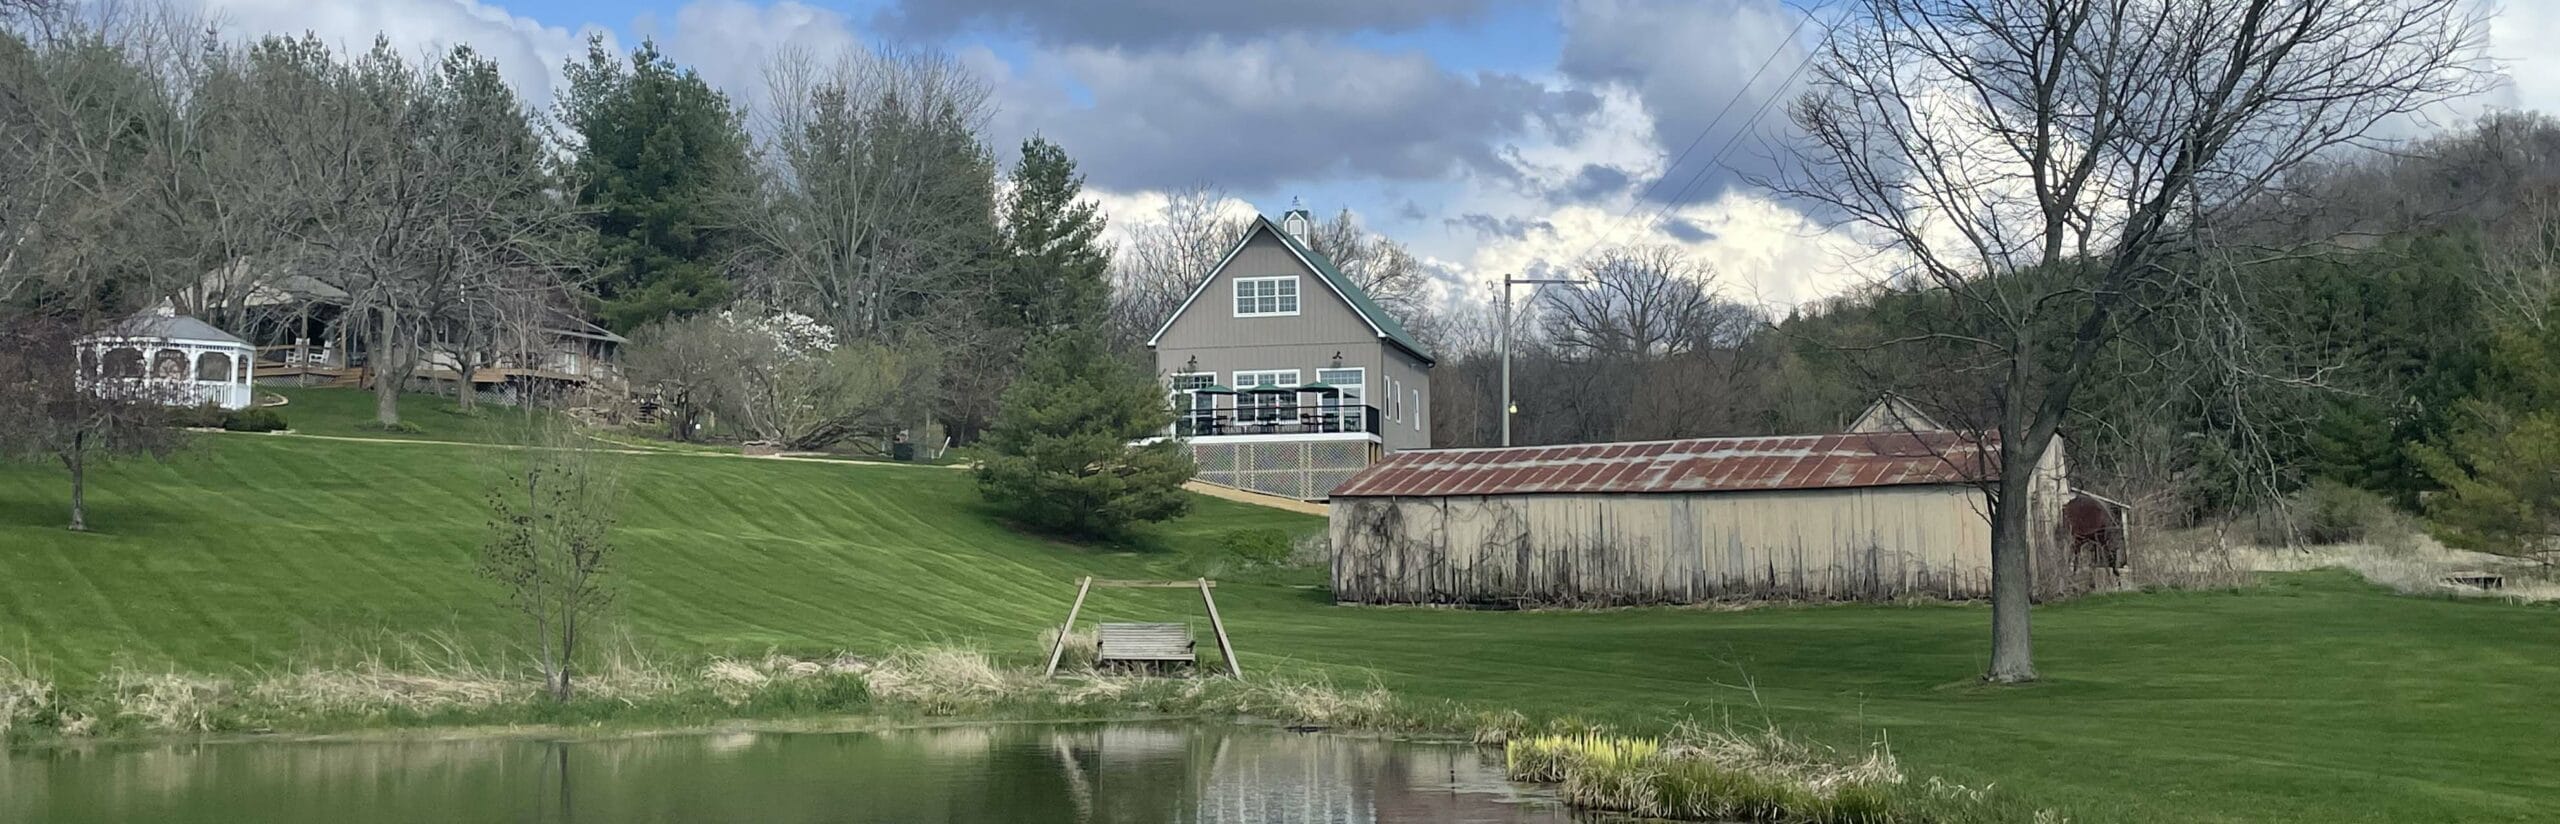 view from pond of barn and main house